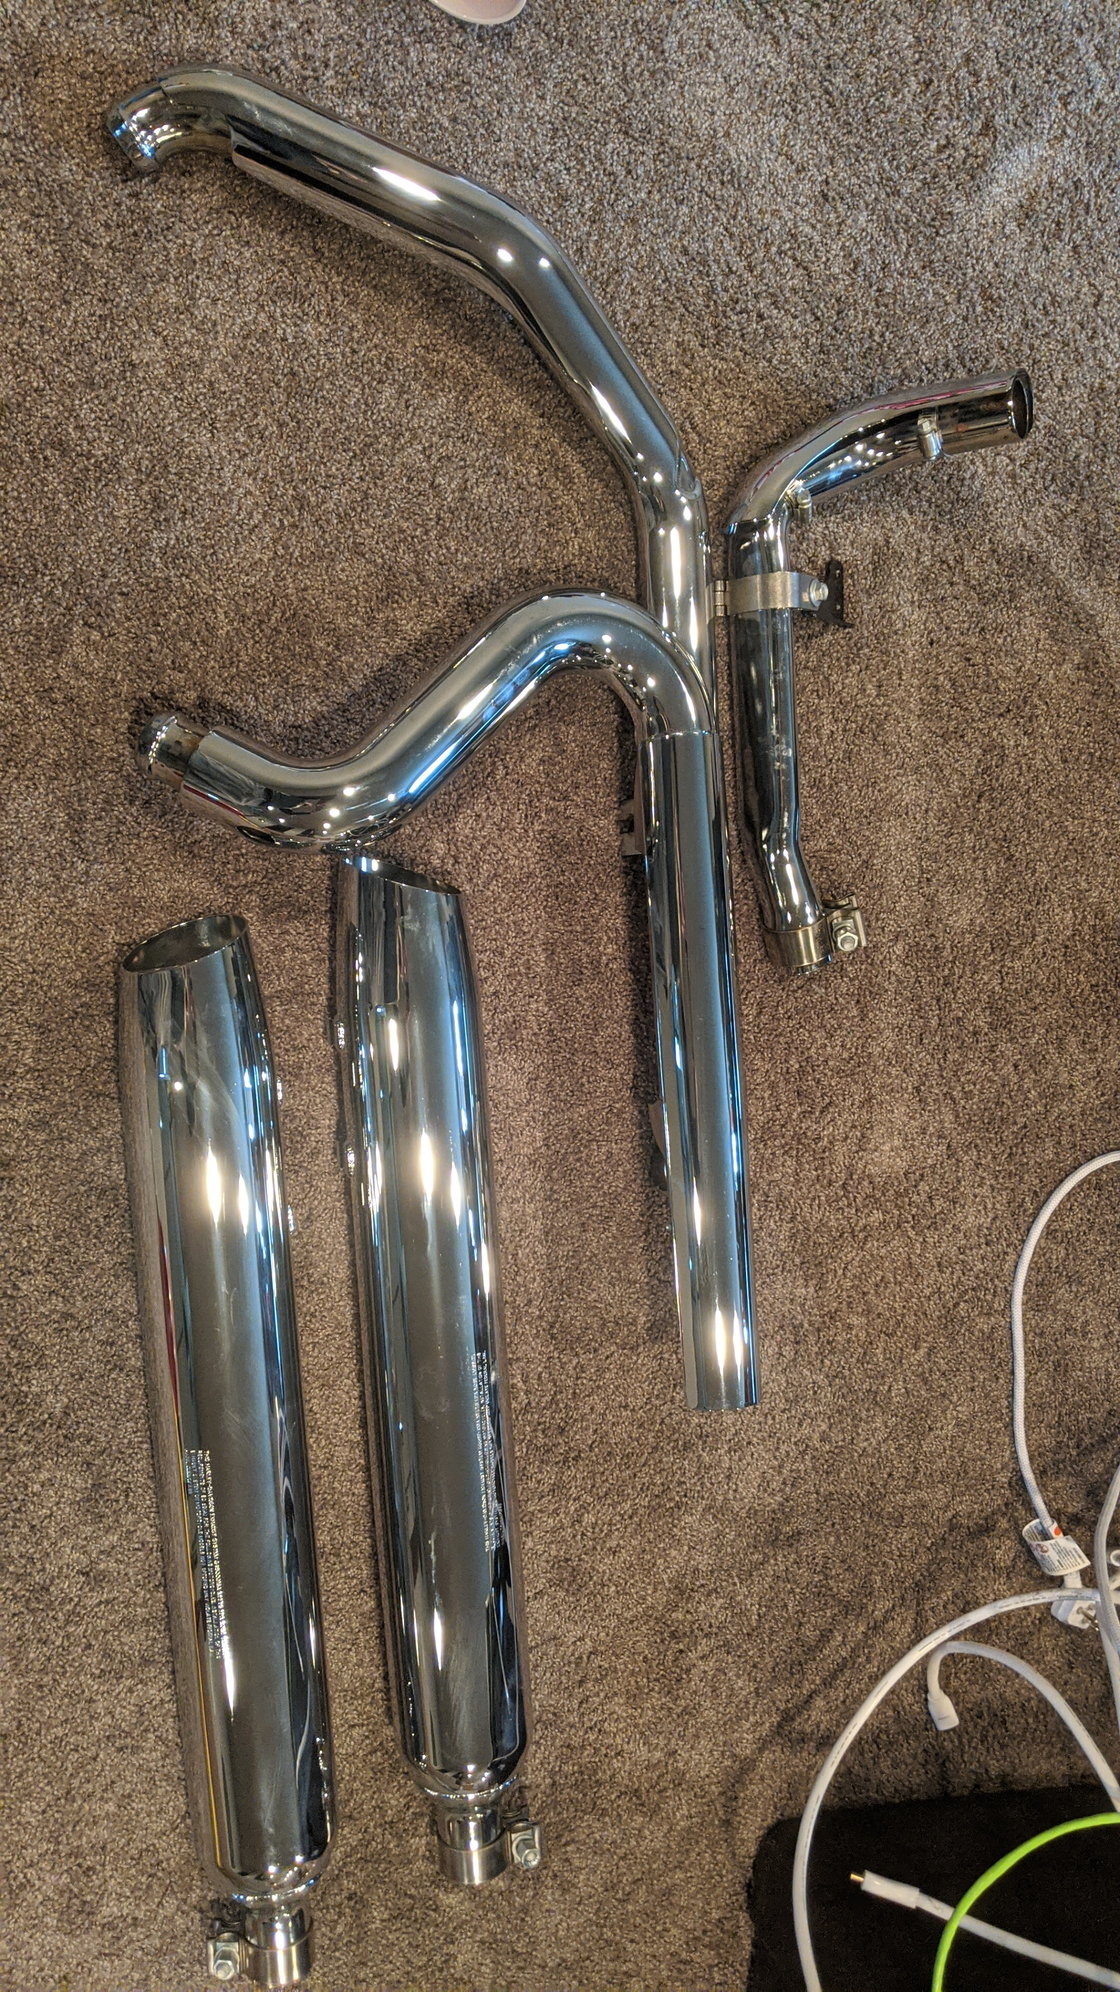 2015 Street Glide Stock full exhaust system - Harley Davidson Forums